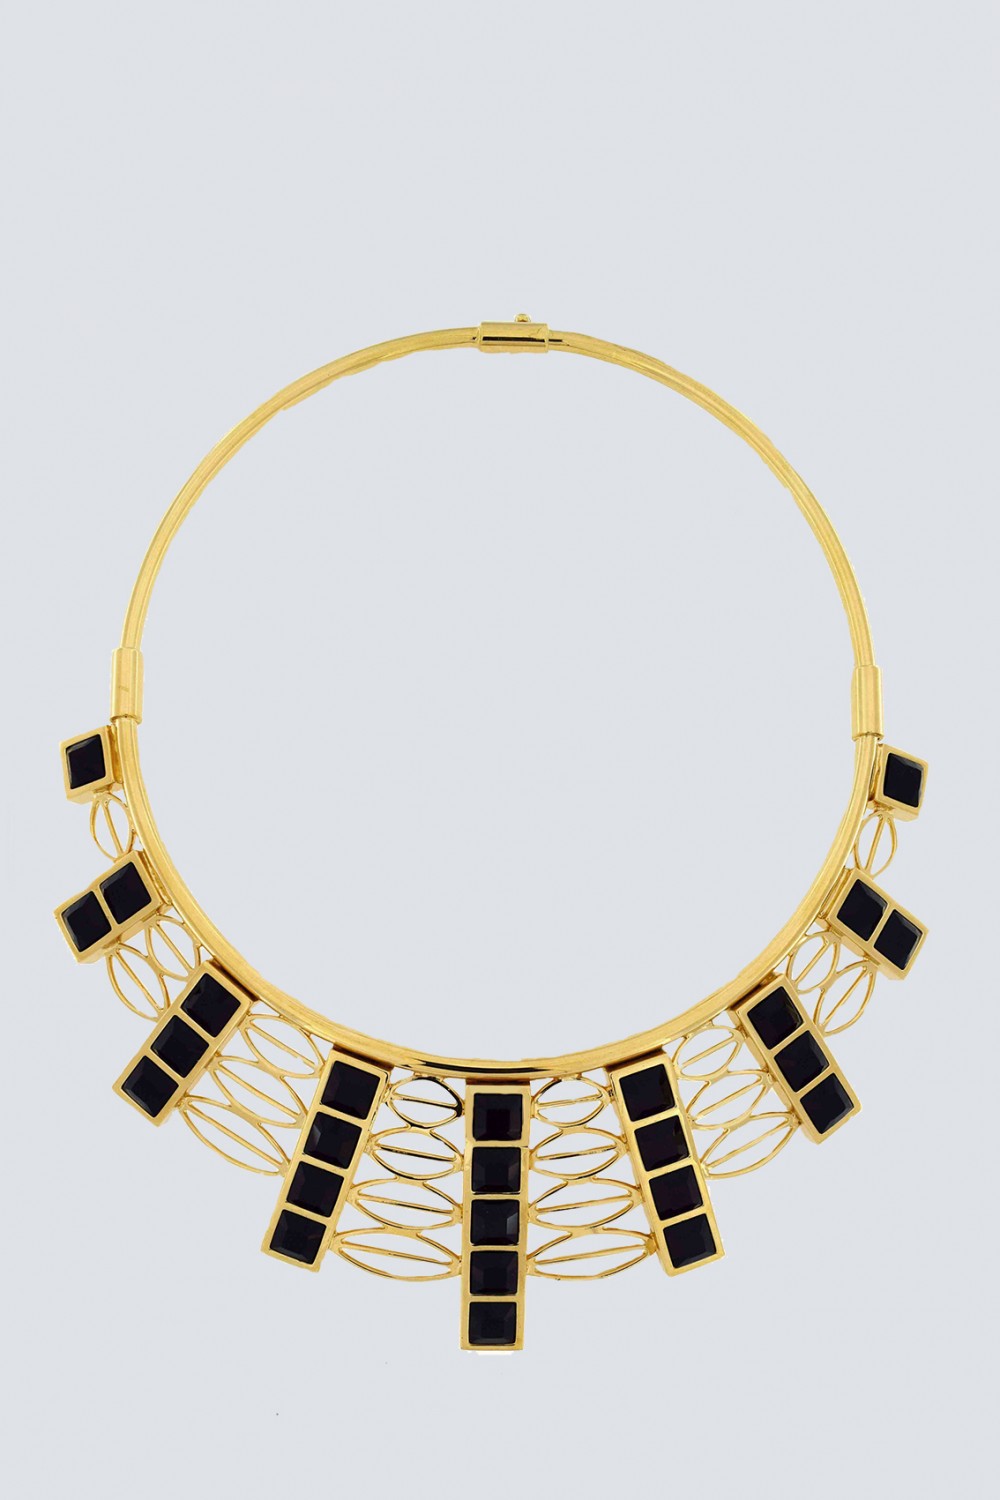 Gold and black necklace 